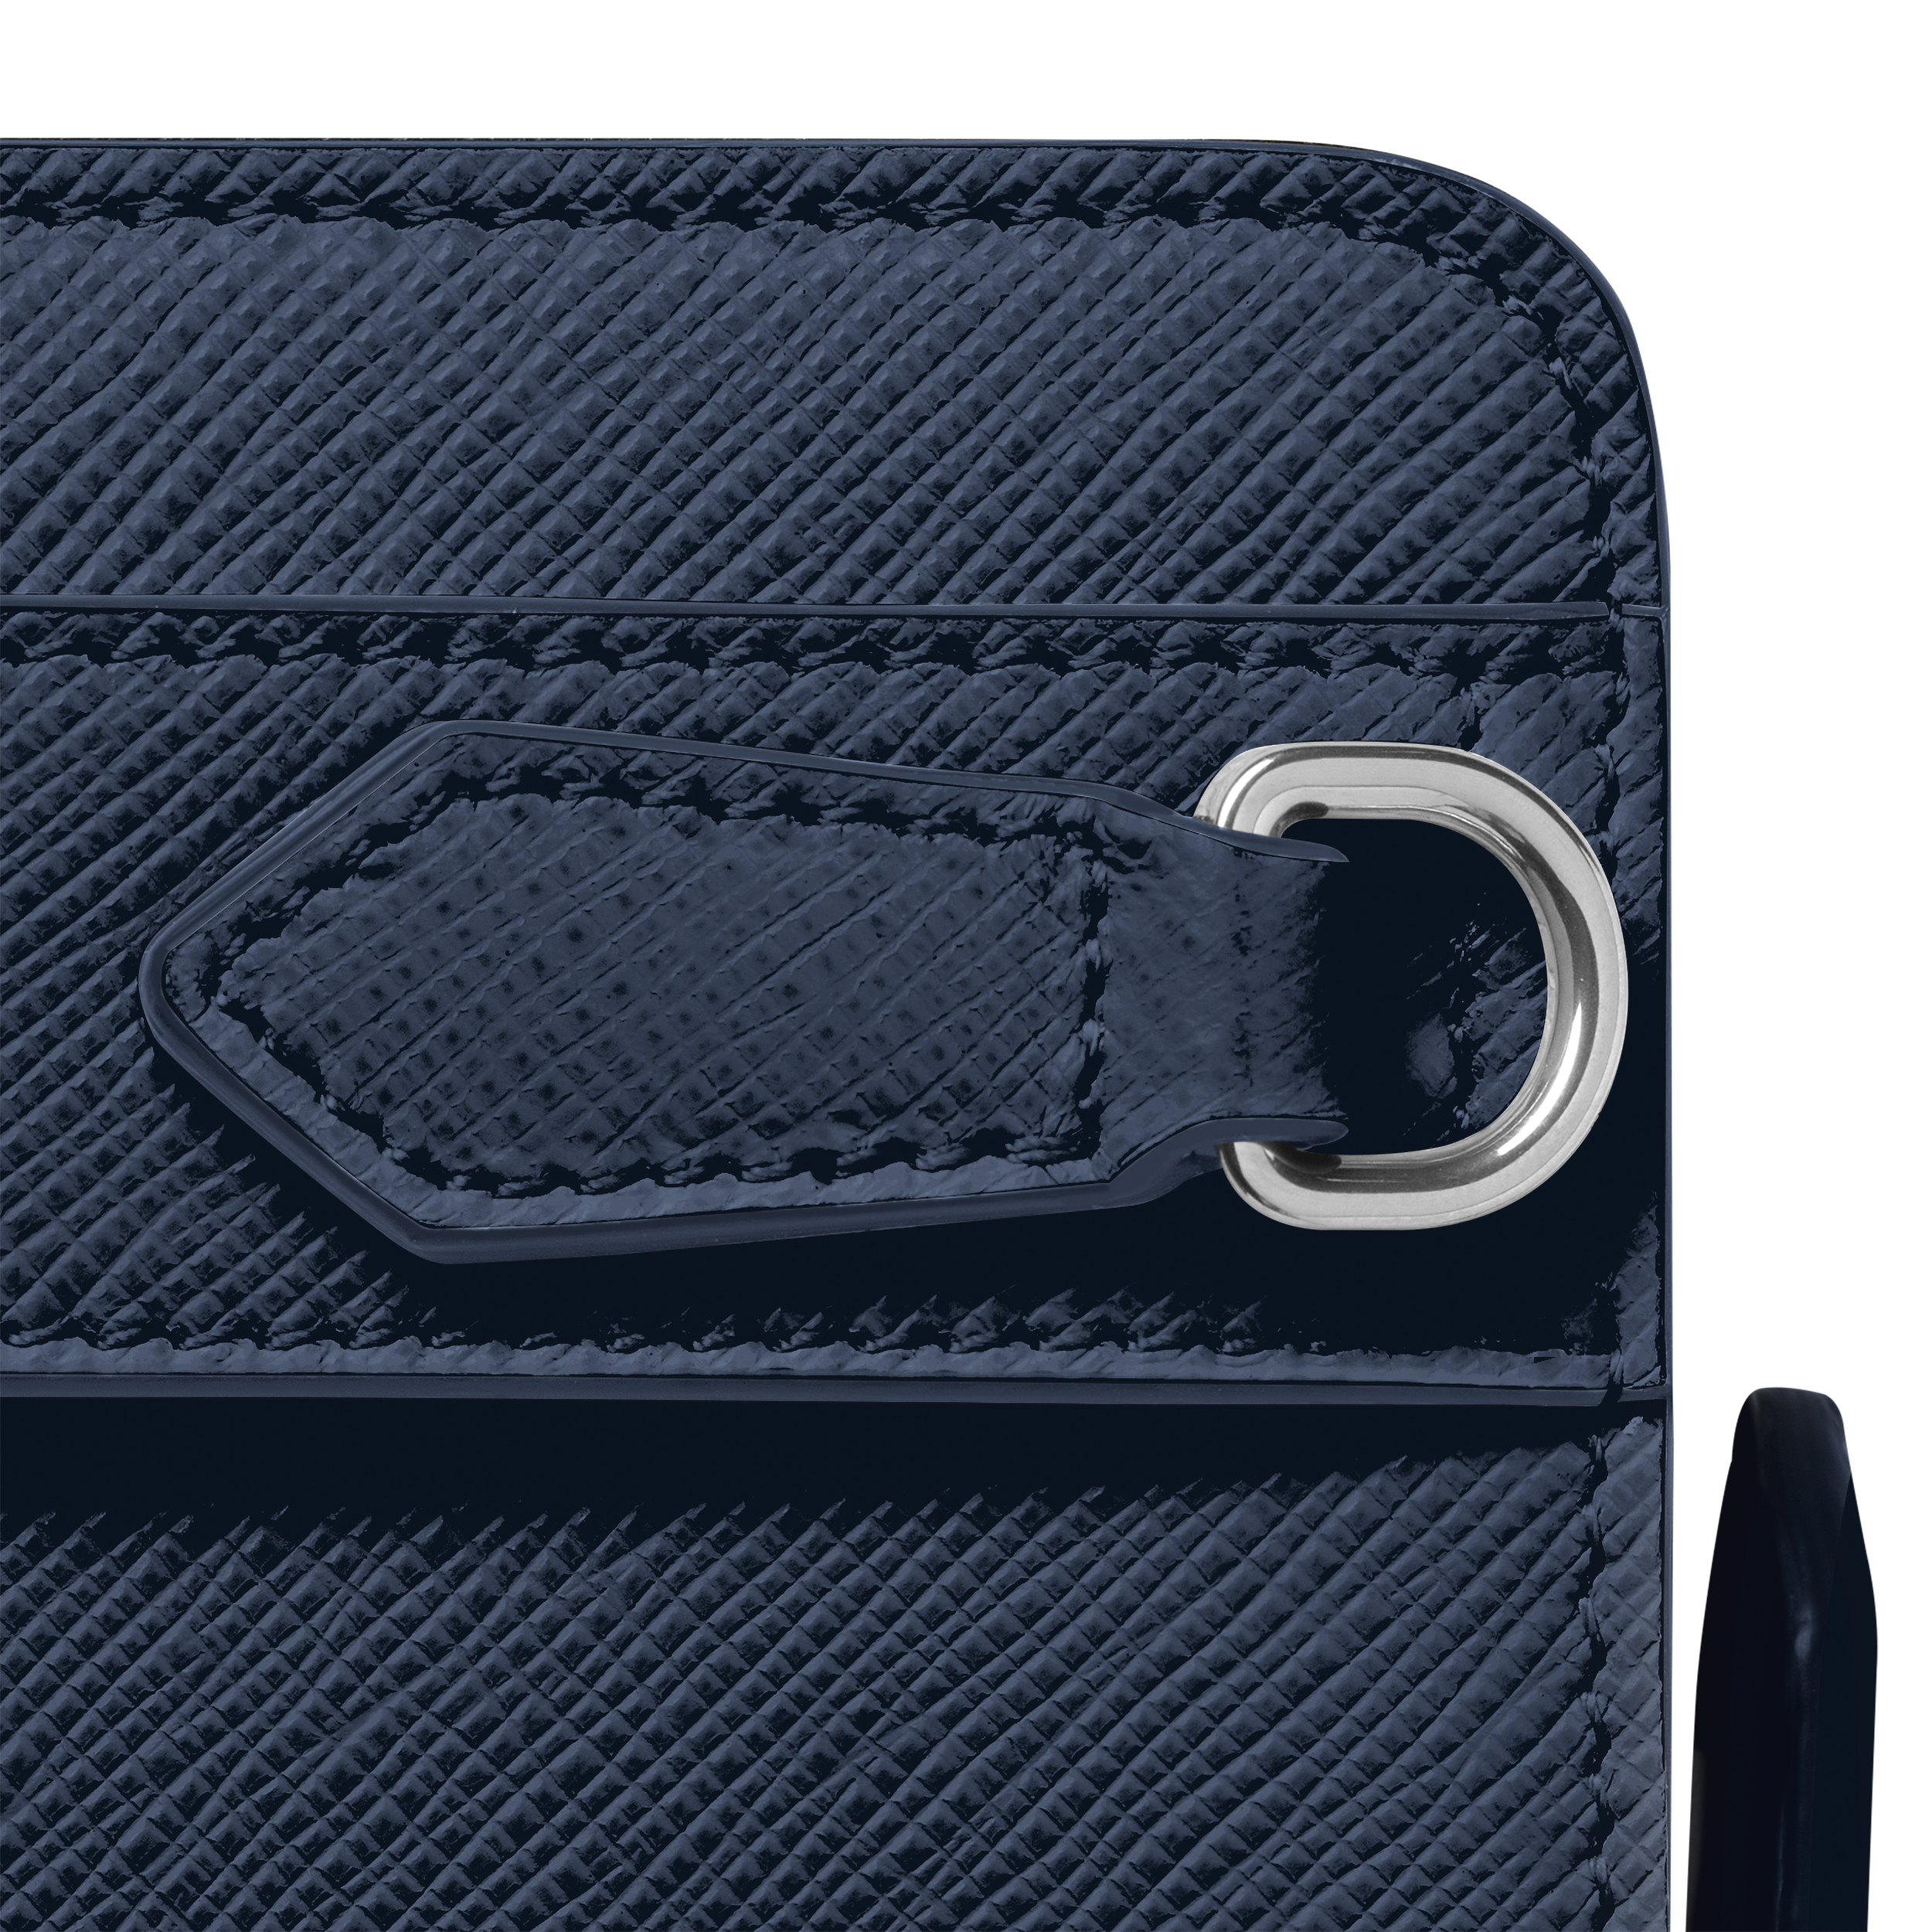 Montblanc Sartorial phone pouch, image 2